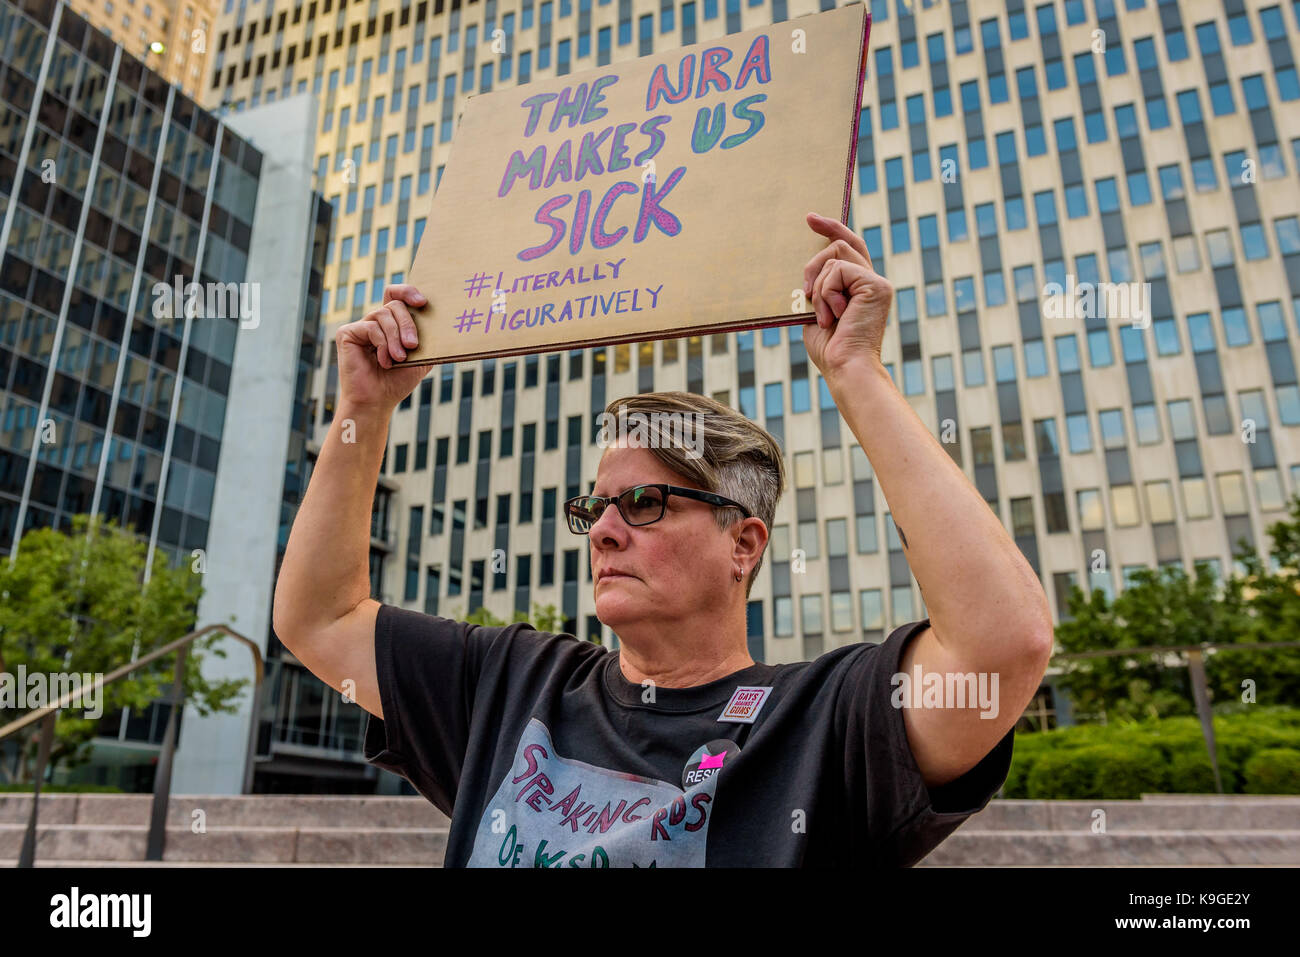 New York, United States. 22nd Sep, 2017. Gays against guns confronted Tom Price outside the New York City office of the Centers for Disease Control and Prevention at Thomas Paine Park. GAG demands that Price, the U.S. Secretary of Health and Human Services, start supporting stronger background checks, and stop blocking funding for research into gun violence. Credit: Erik McGregor/Pacific Press/Alamy Live News Stock Photo